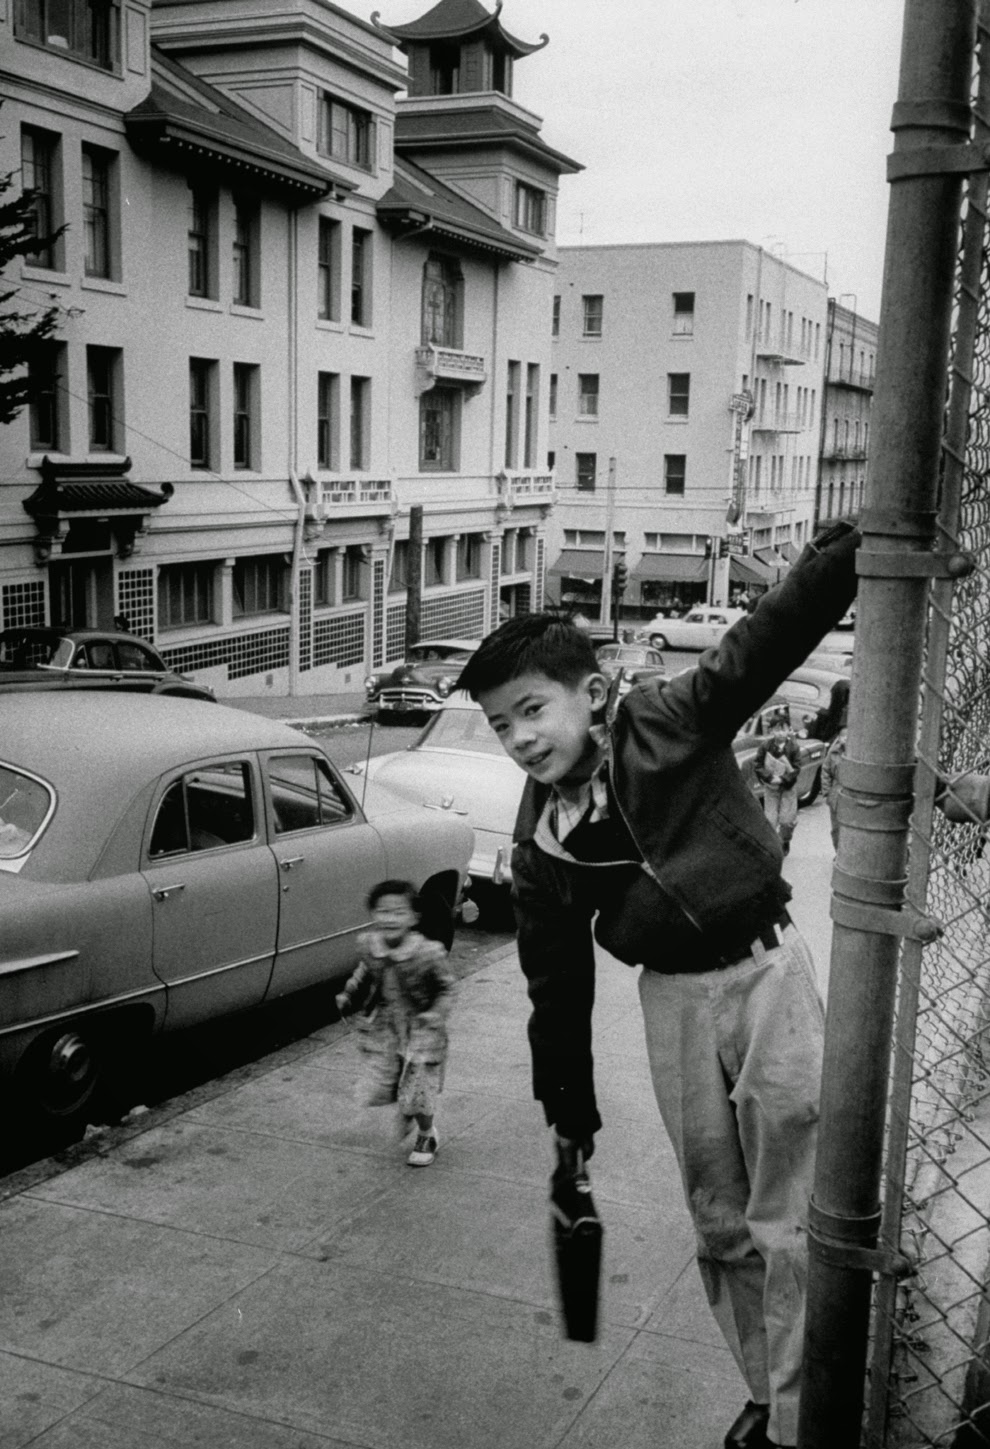 Amazing Black and White Photos of Life in San Franciscoâ€™s Chinatown in